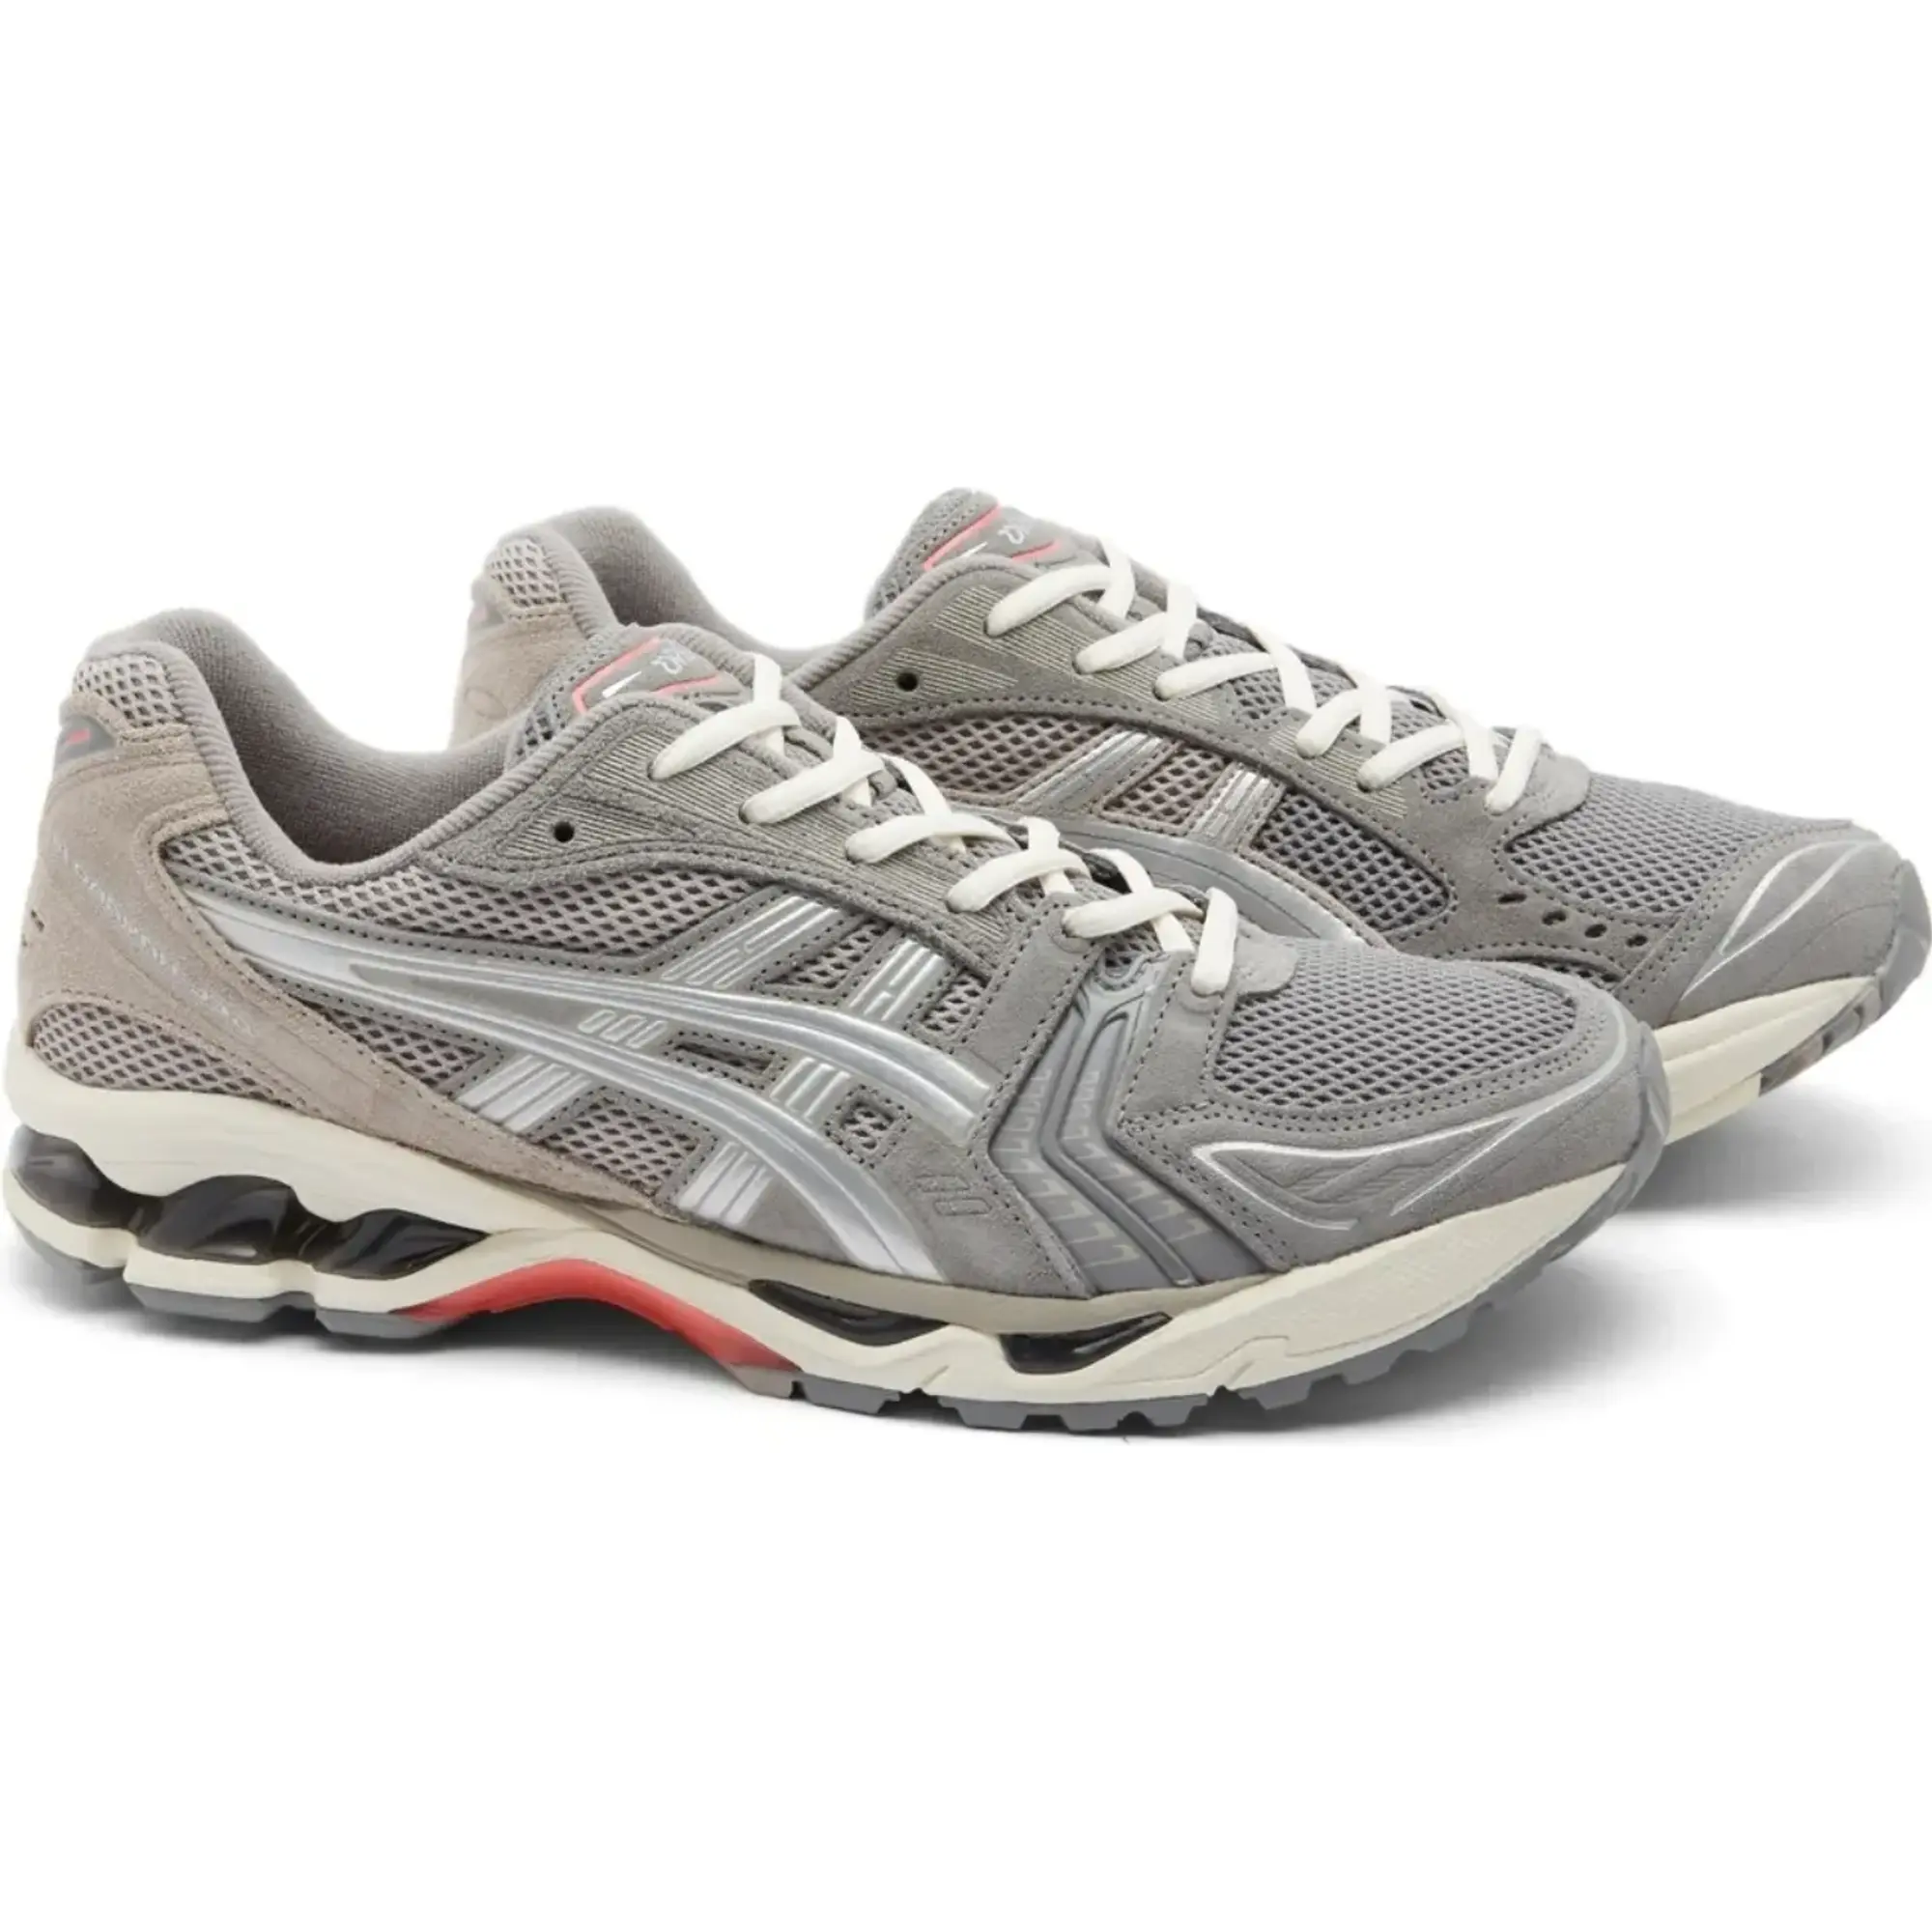 Asics Gel-kayano 14 Trainers Brown Grey Red